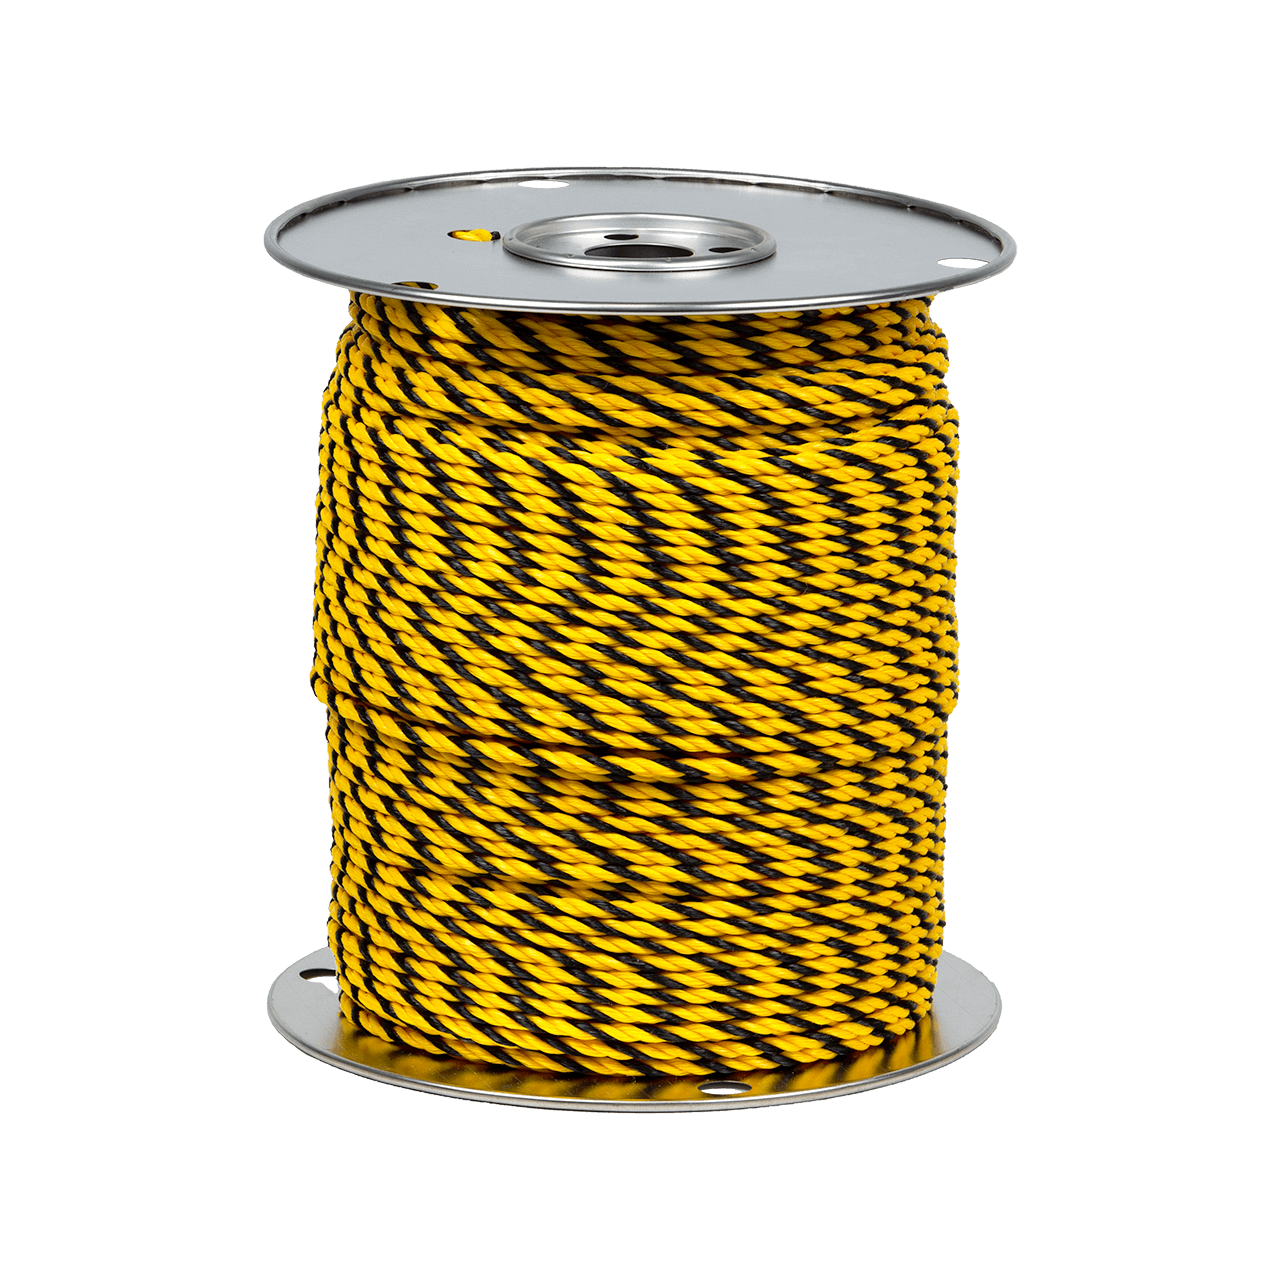 1/4 x 754' Poly Rope - Yellow/Black